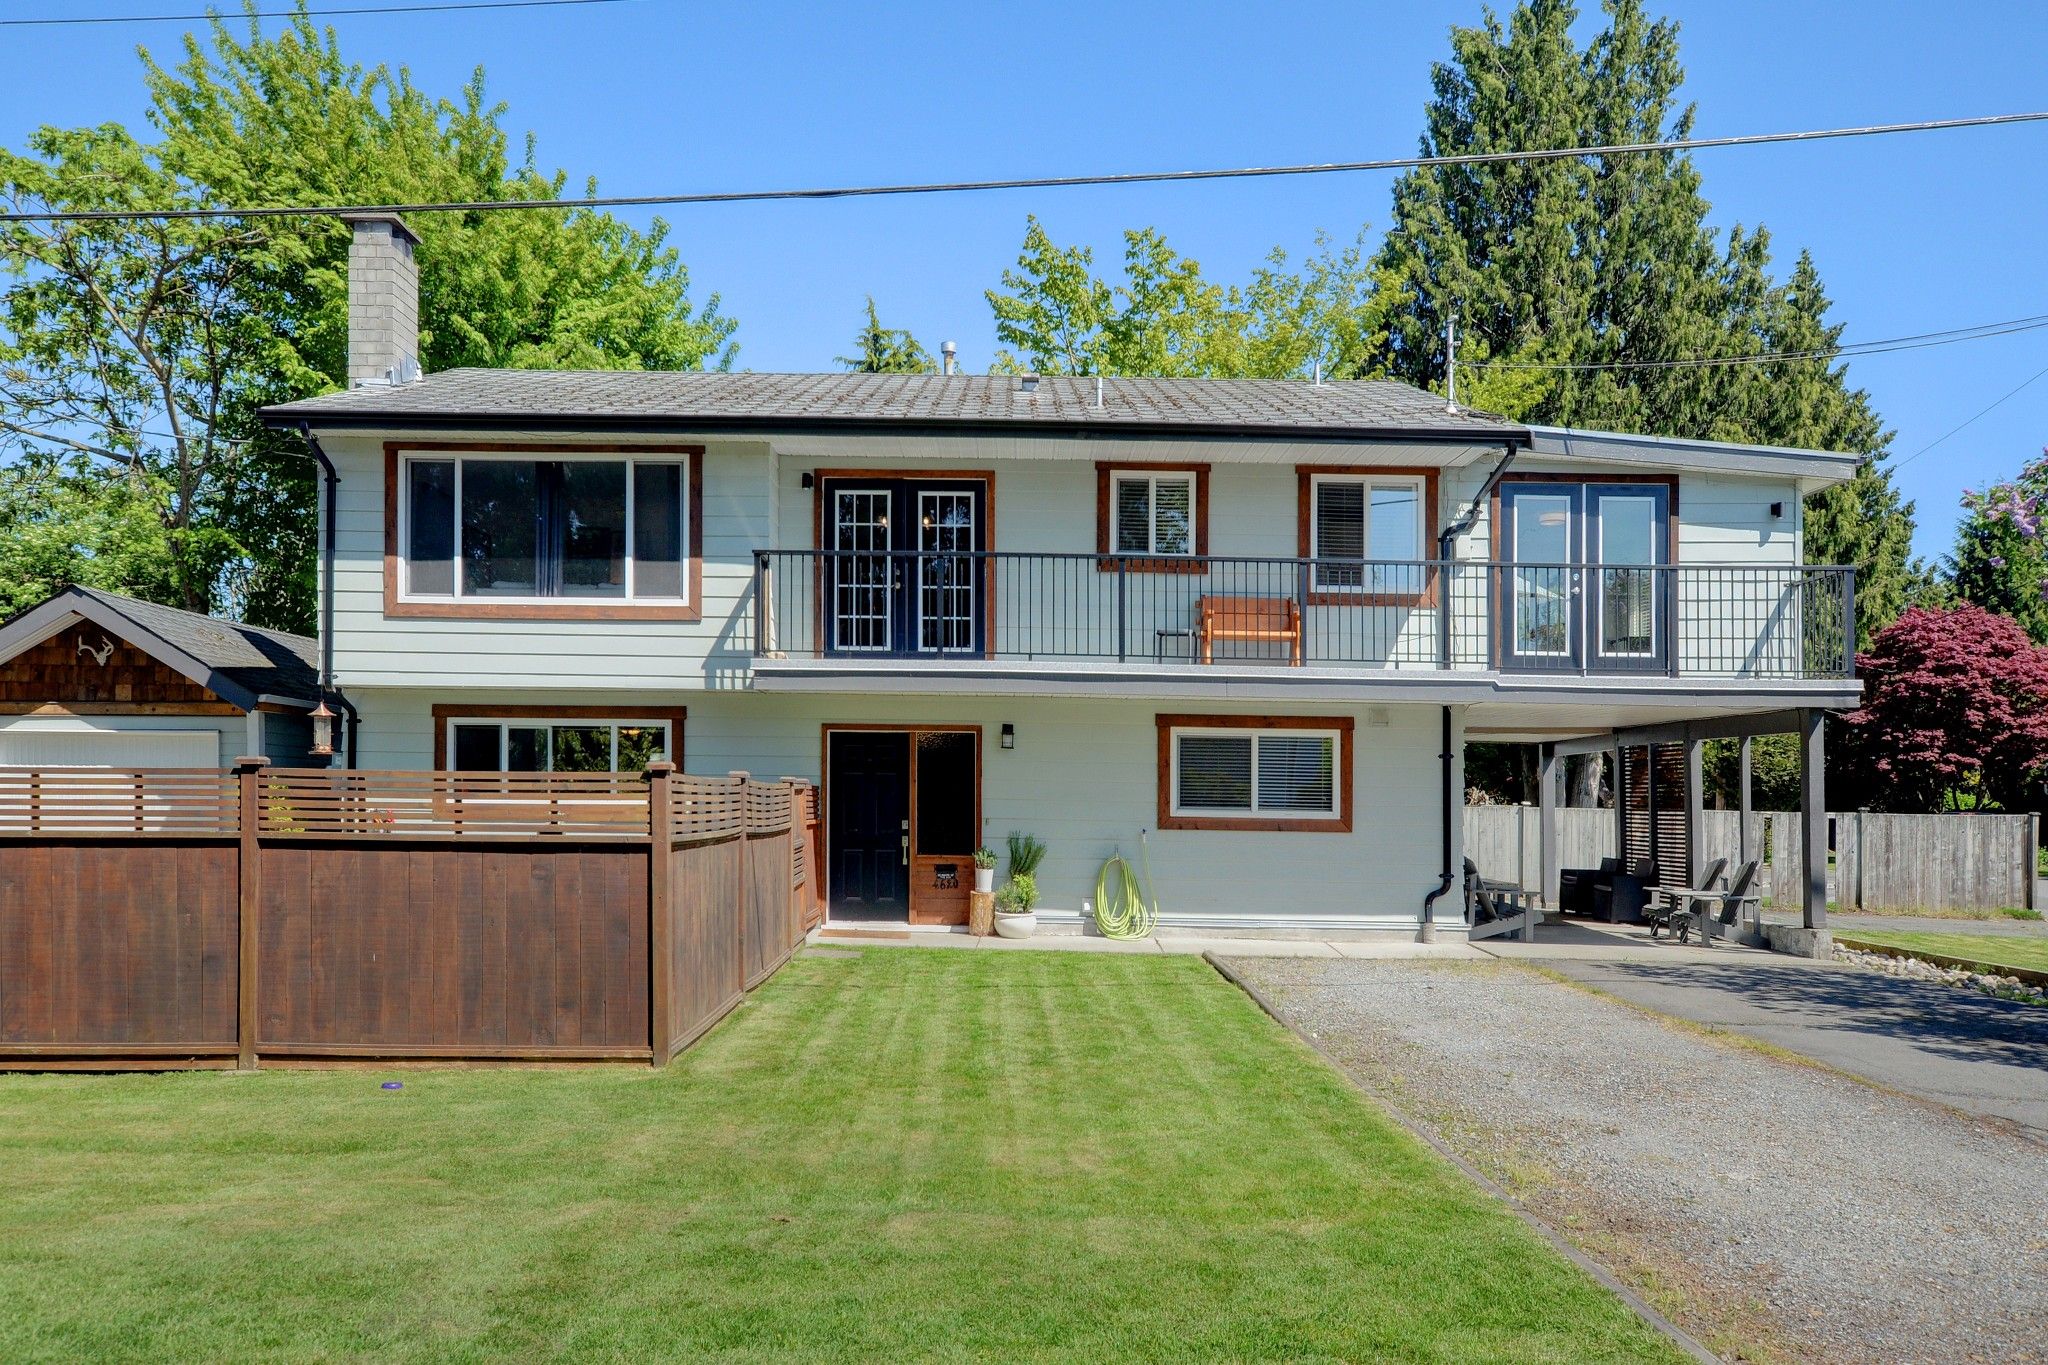 Main Photo: 4620 47A Street in Delta: Ladner Elementary House for sale (Ladner)  : MLS®# R2265312